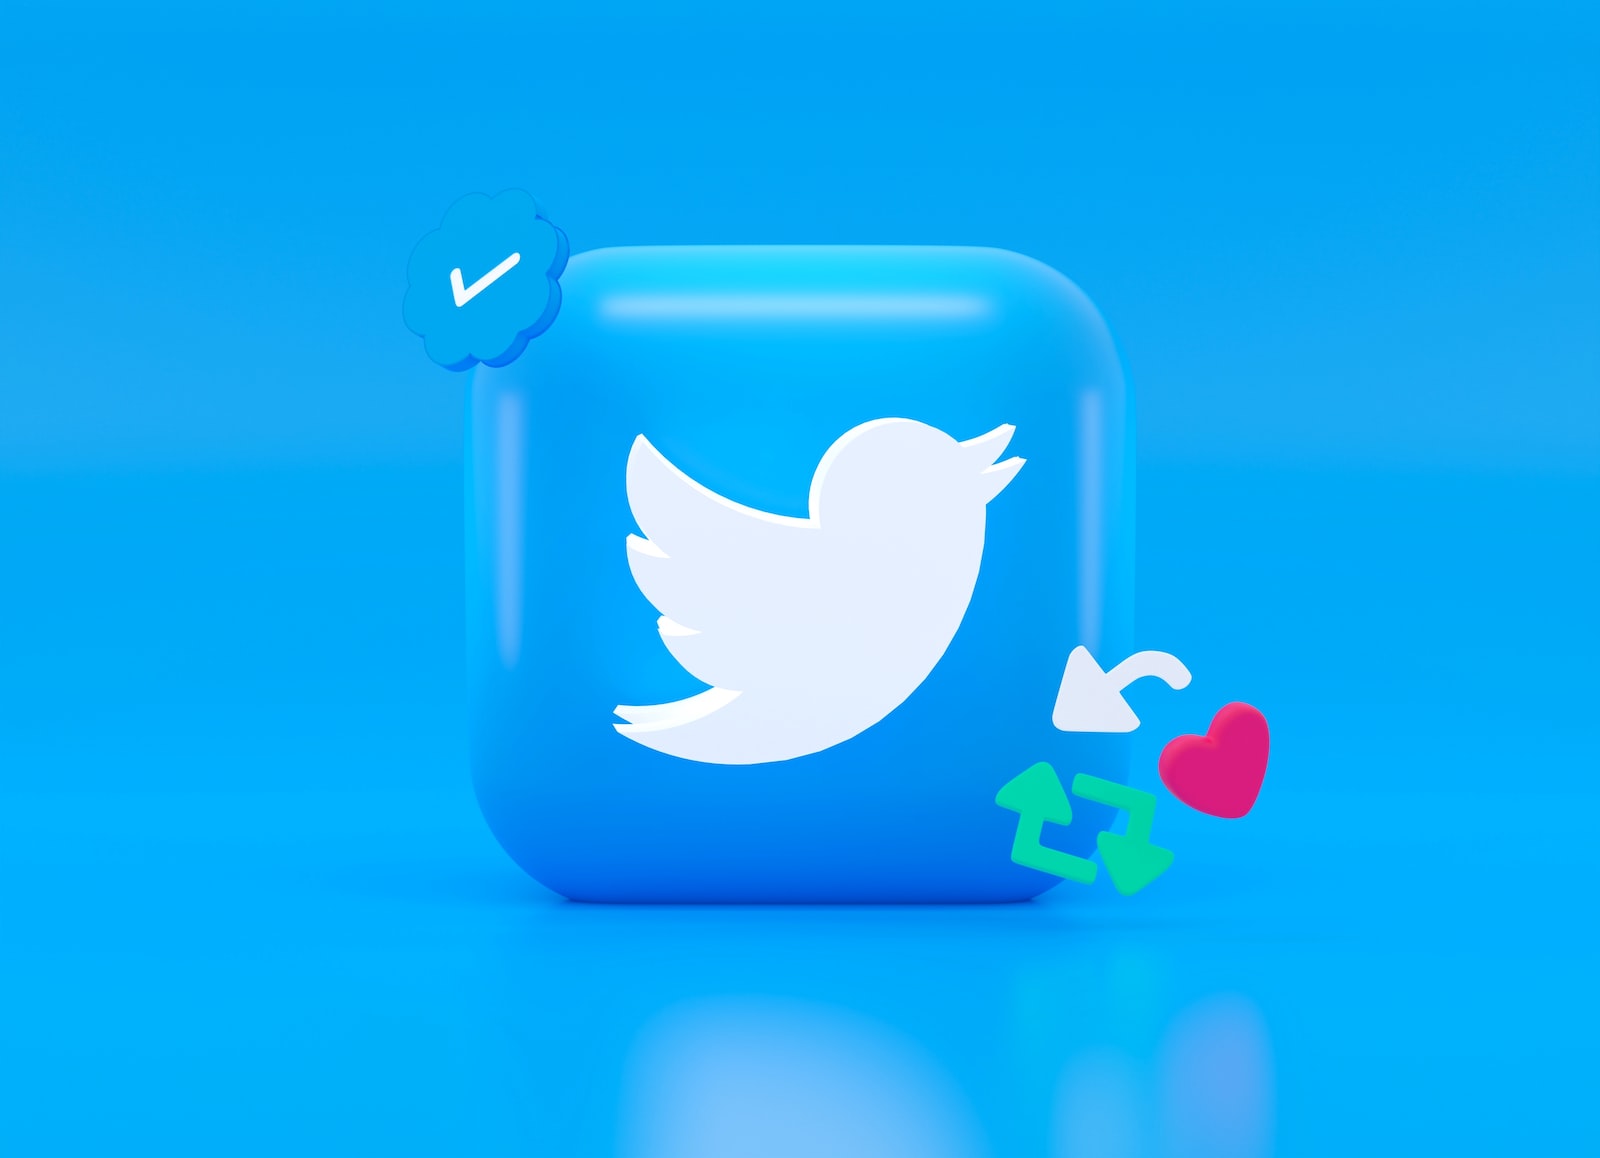 Twitter: charging soon for verification